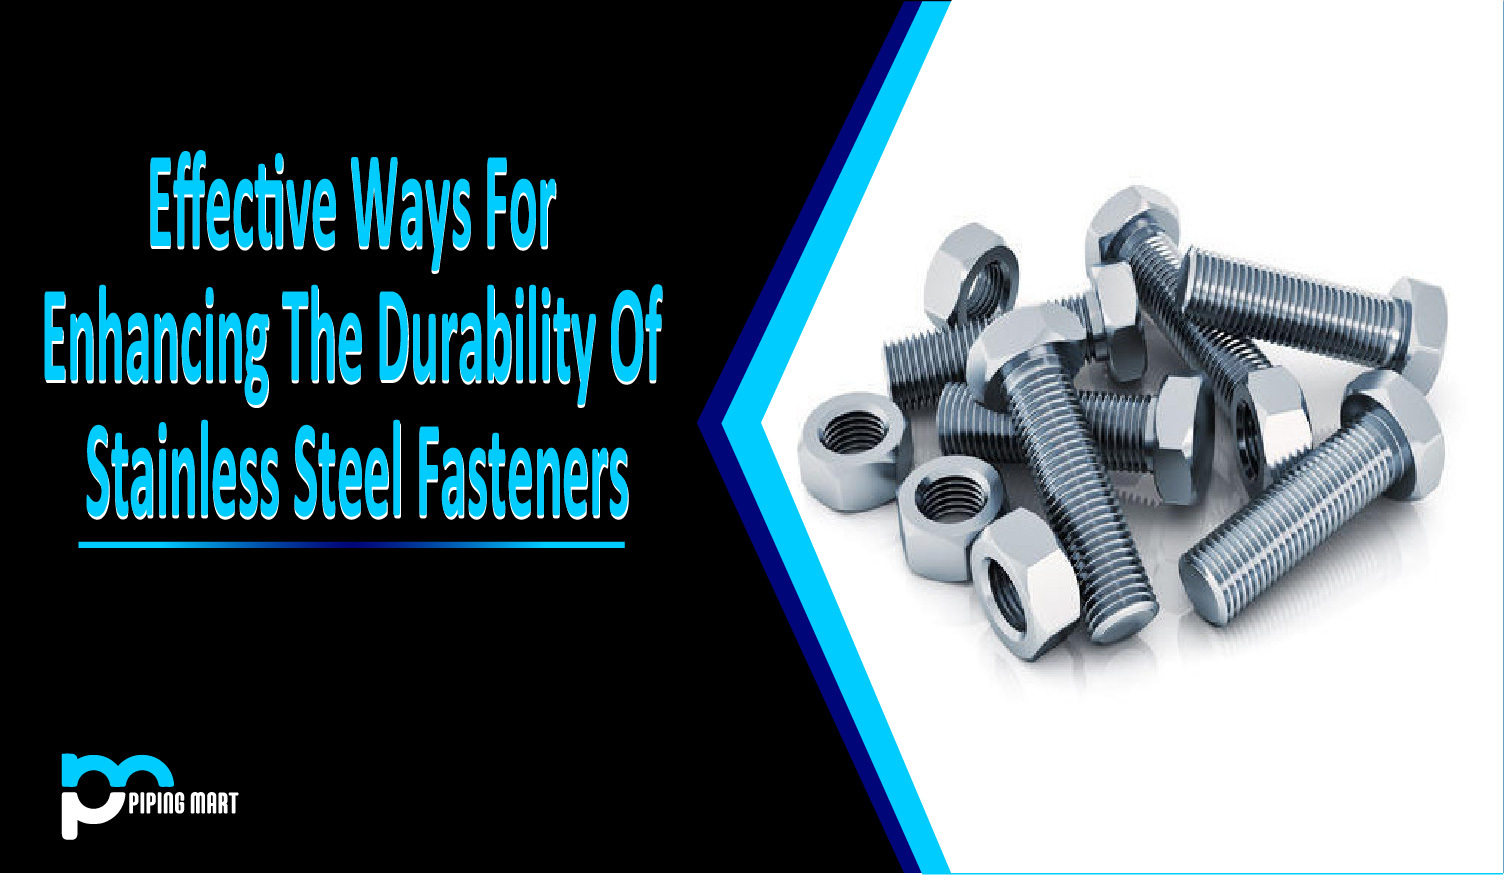 Effective Ways for Enhancing the Durability of Stainless Steel Fasteners